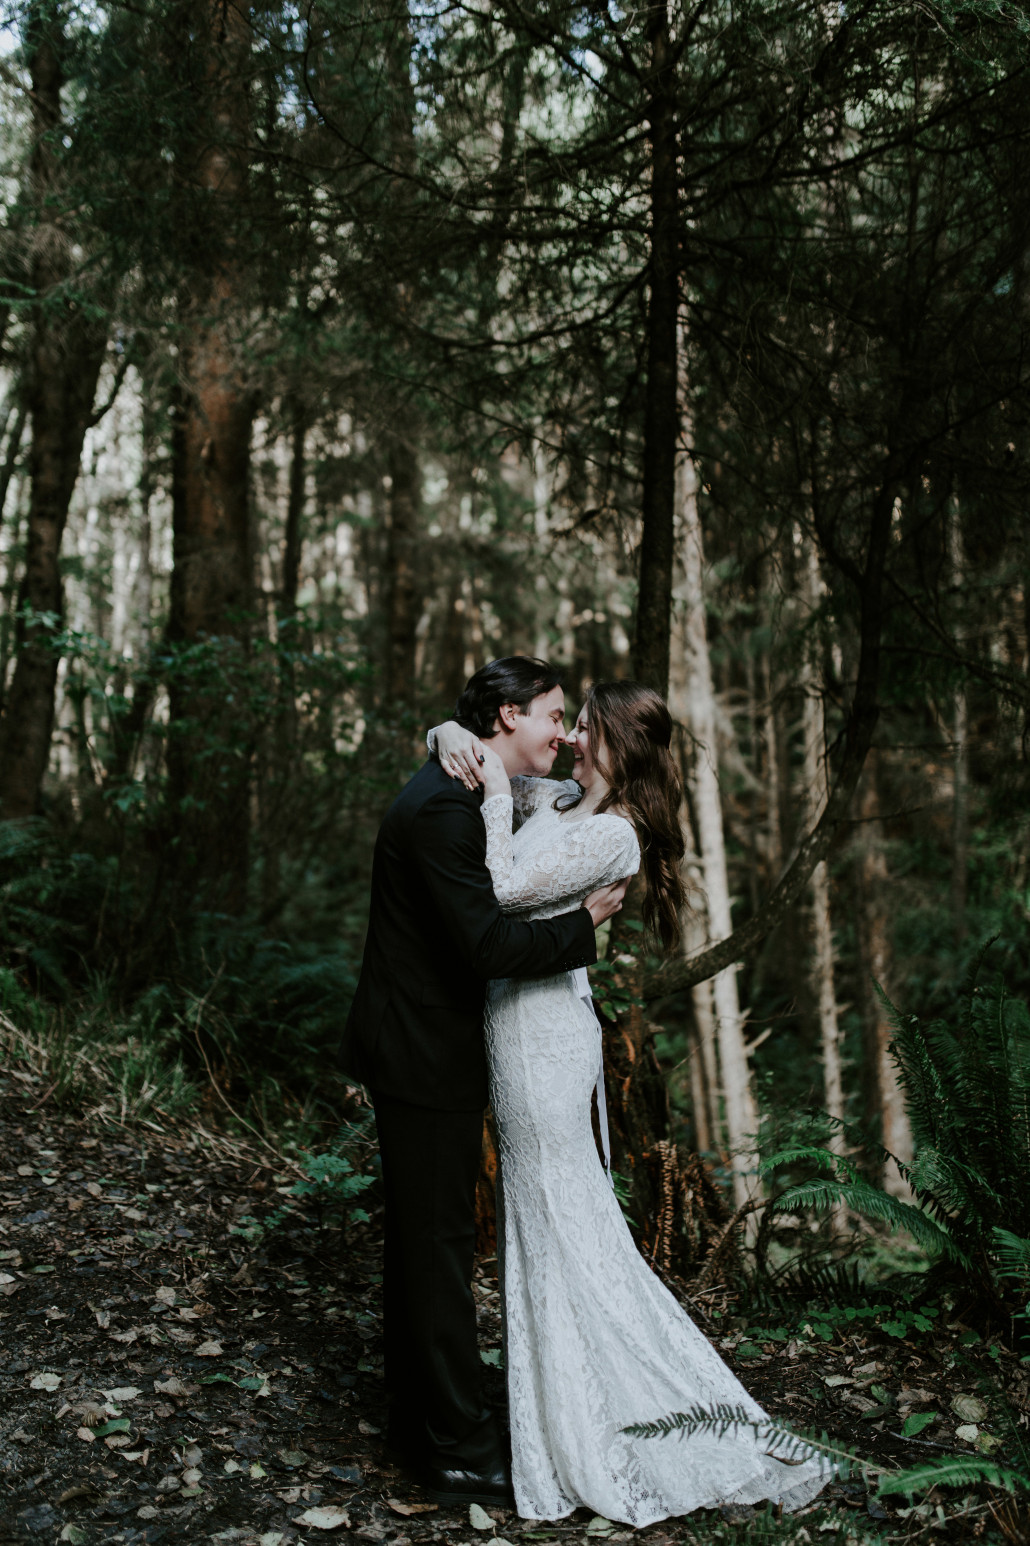 Nicole and Vlad smile at eachother at their elopement ceremony. Elopement wedding photography at Cannon Beach by Sienna Plus Josh.